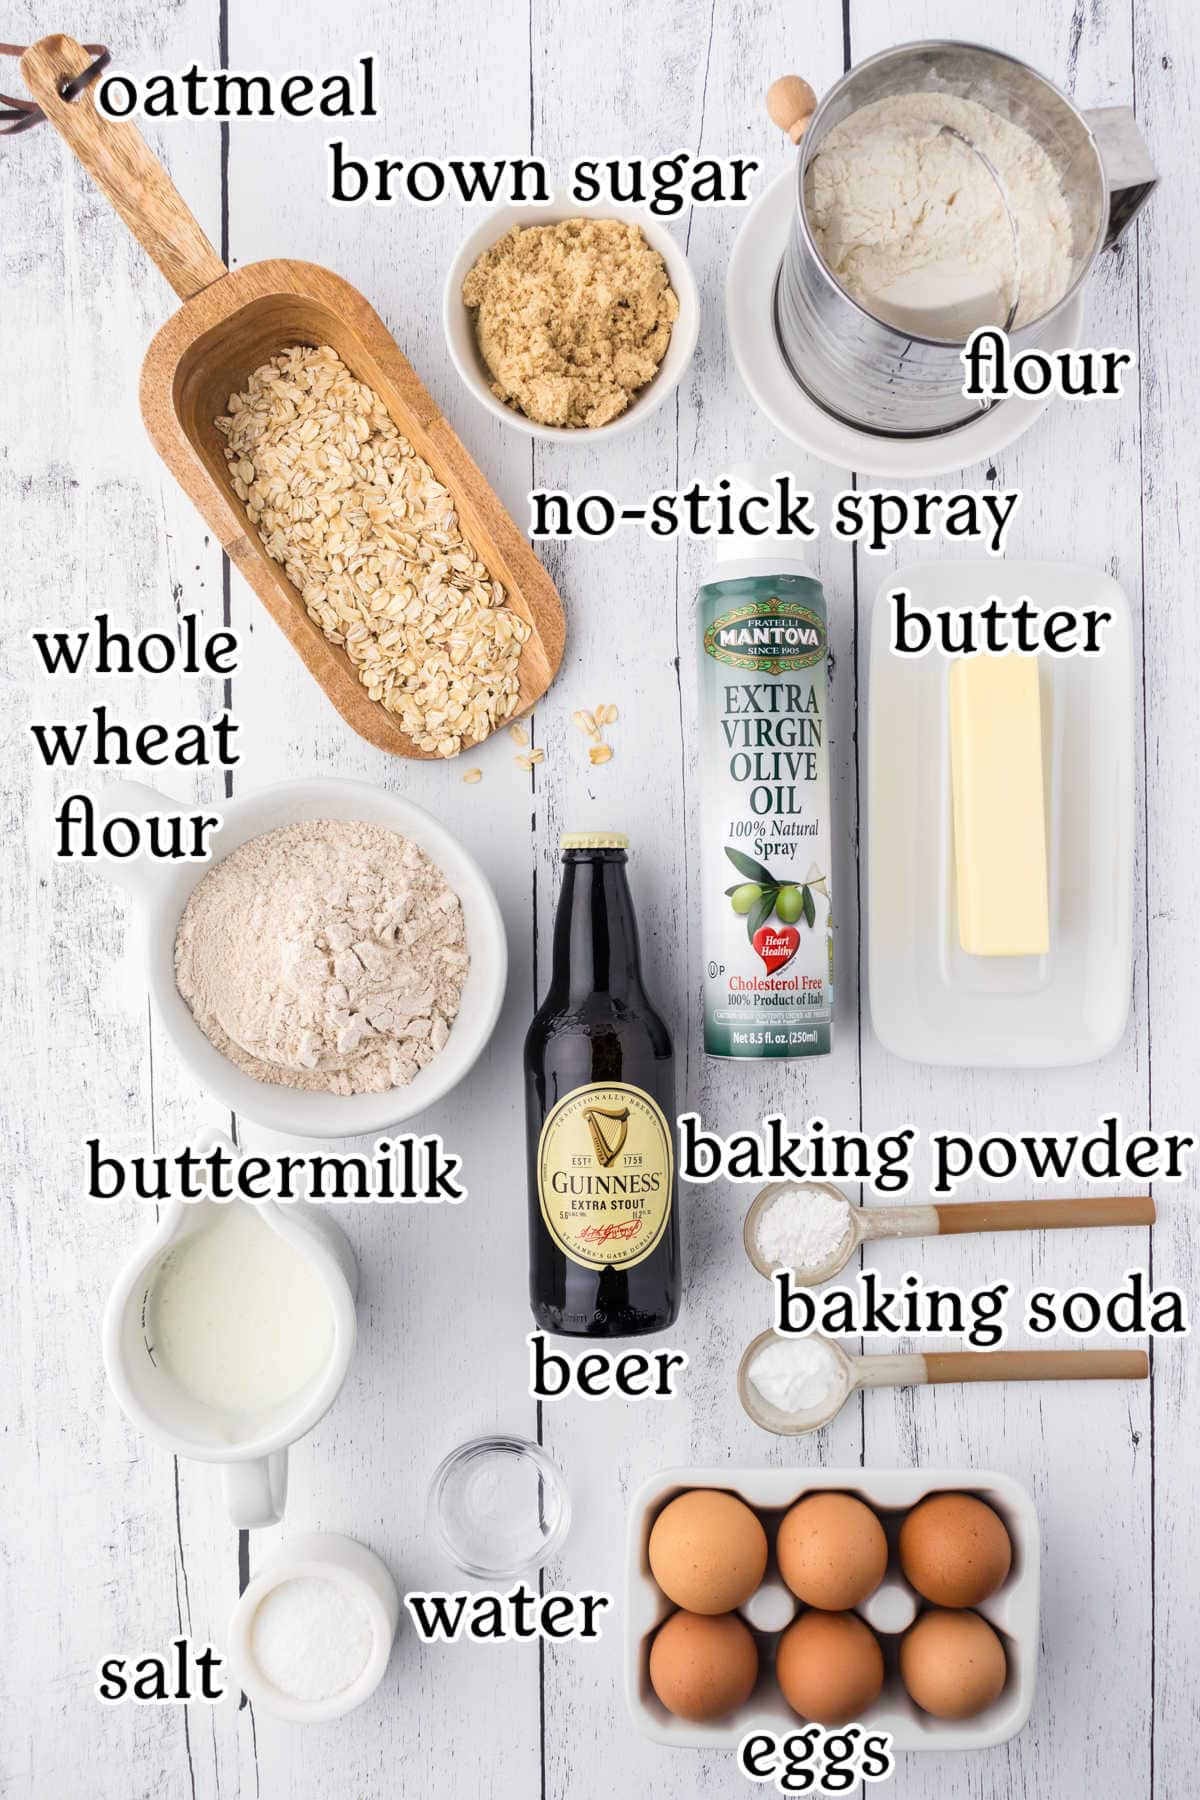 Labeled ingredients for Guinness Irish soda bread.